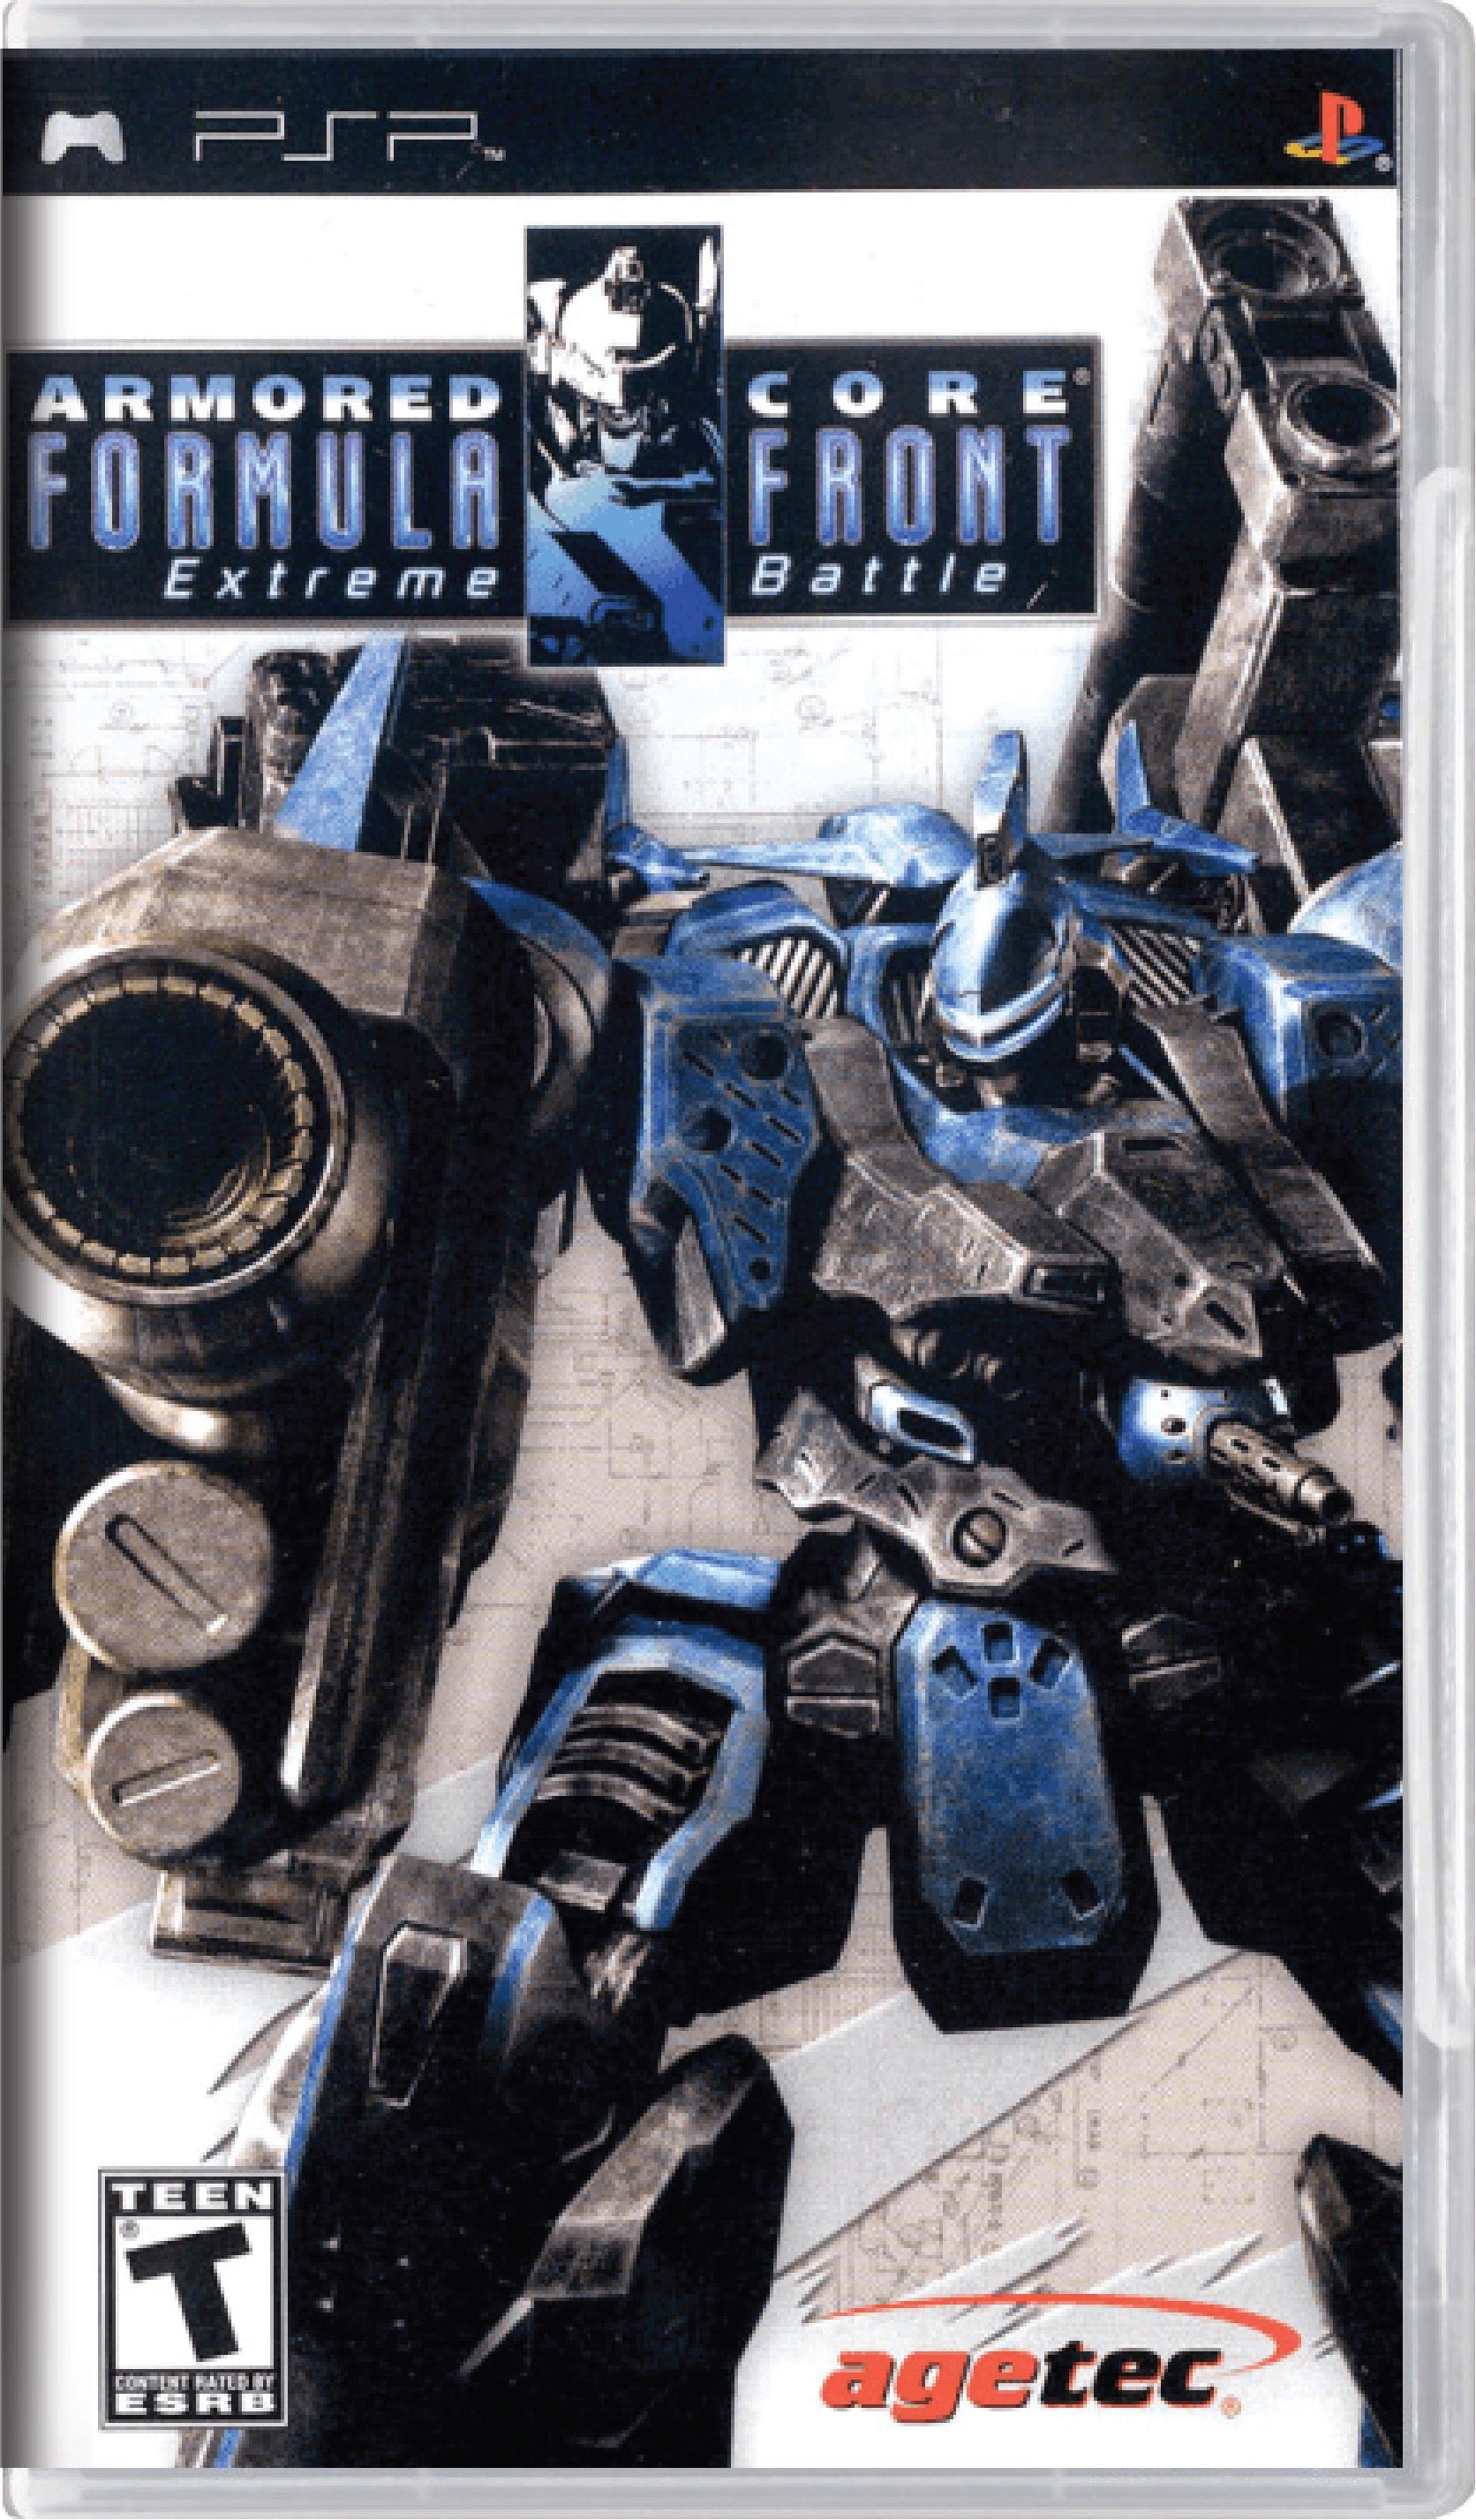 Armored Core Formula Front Cover Art